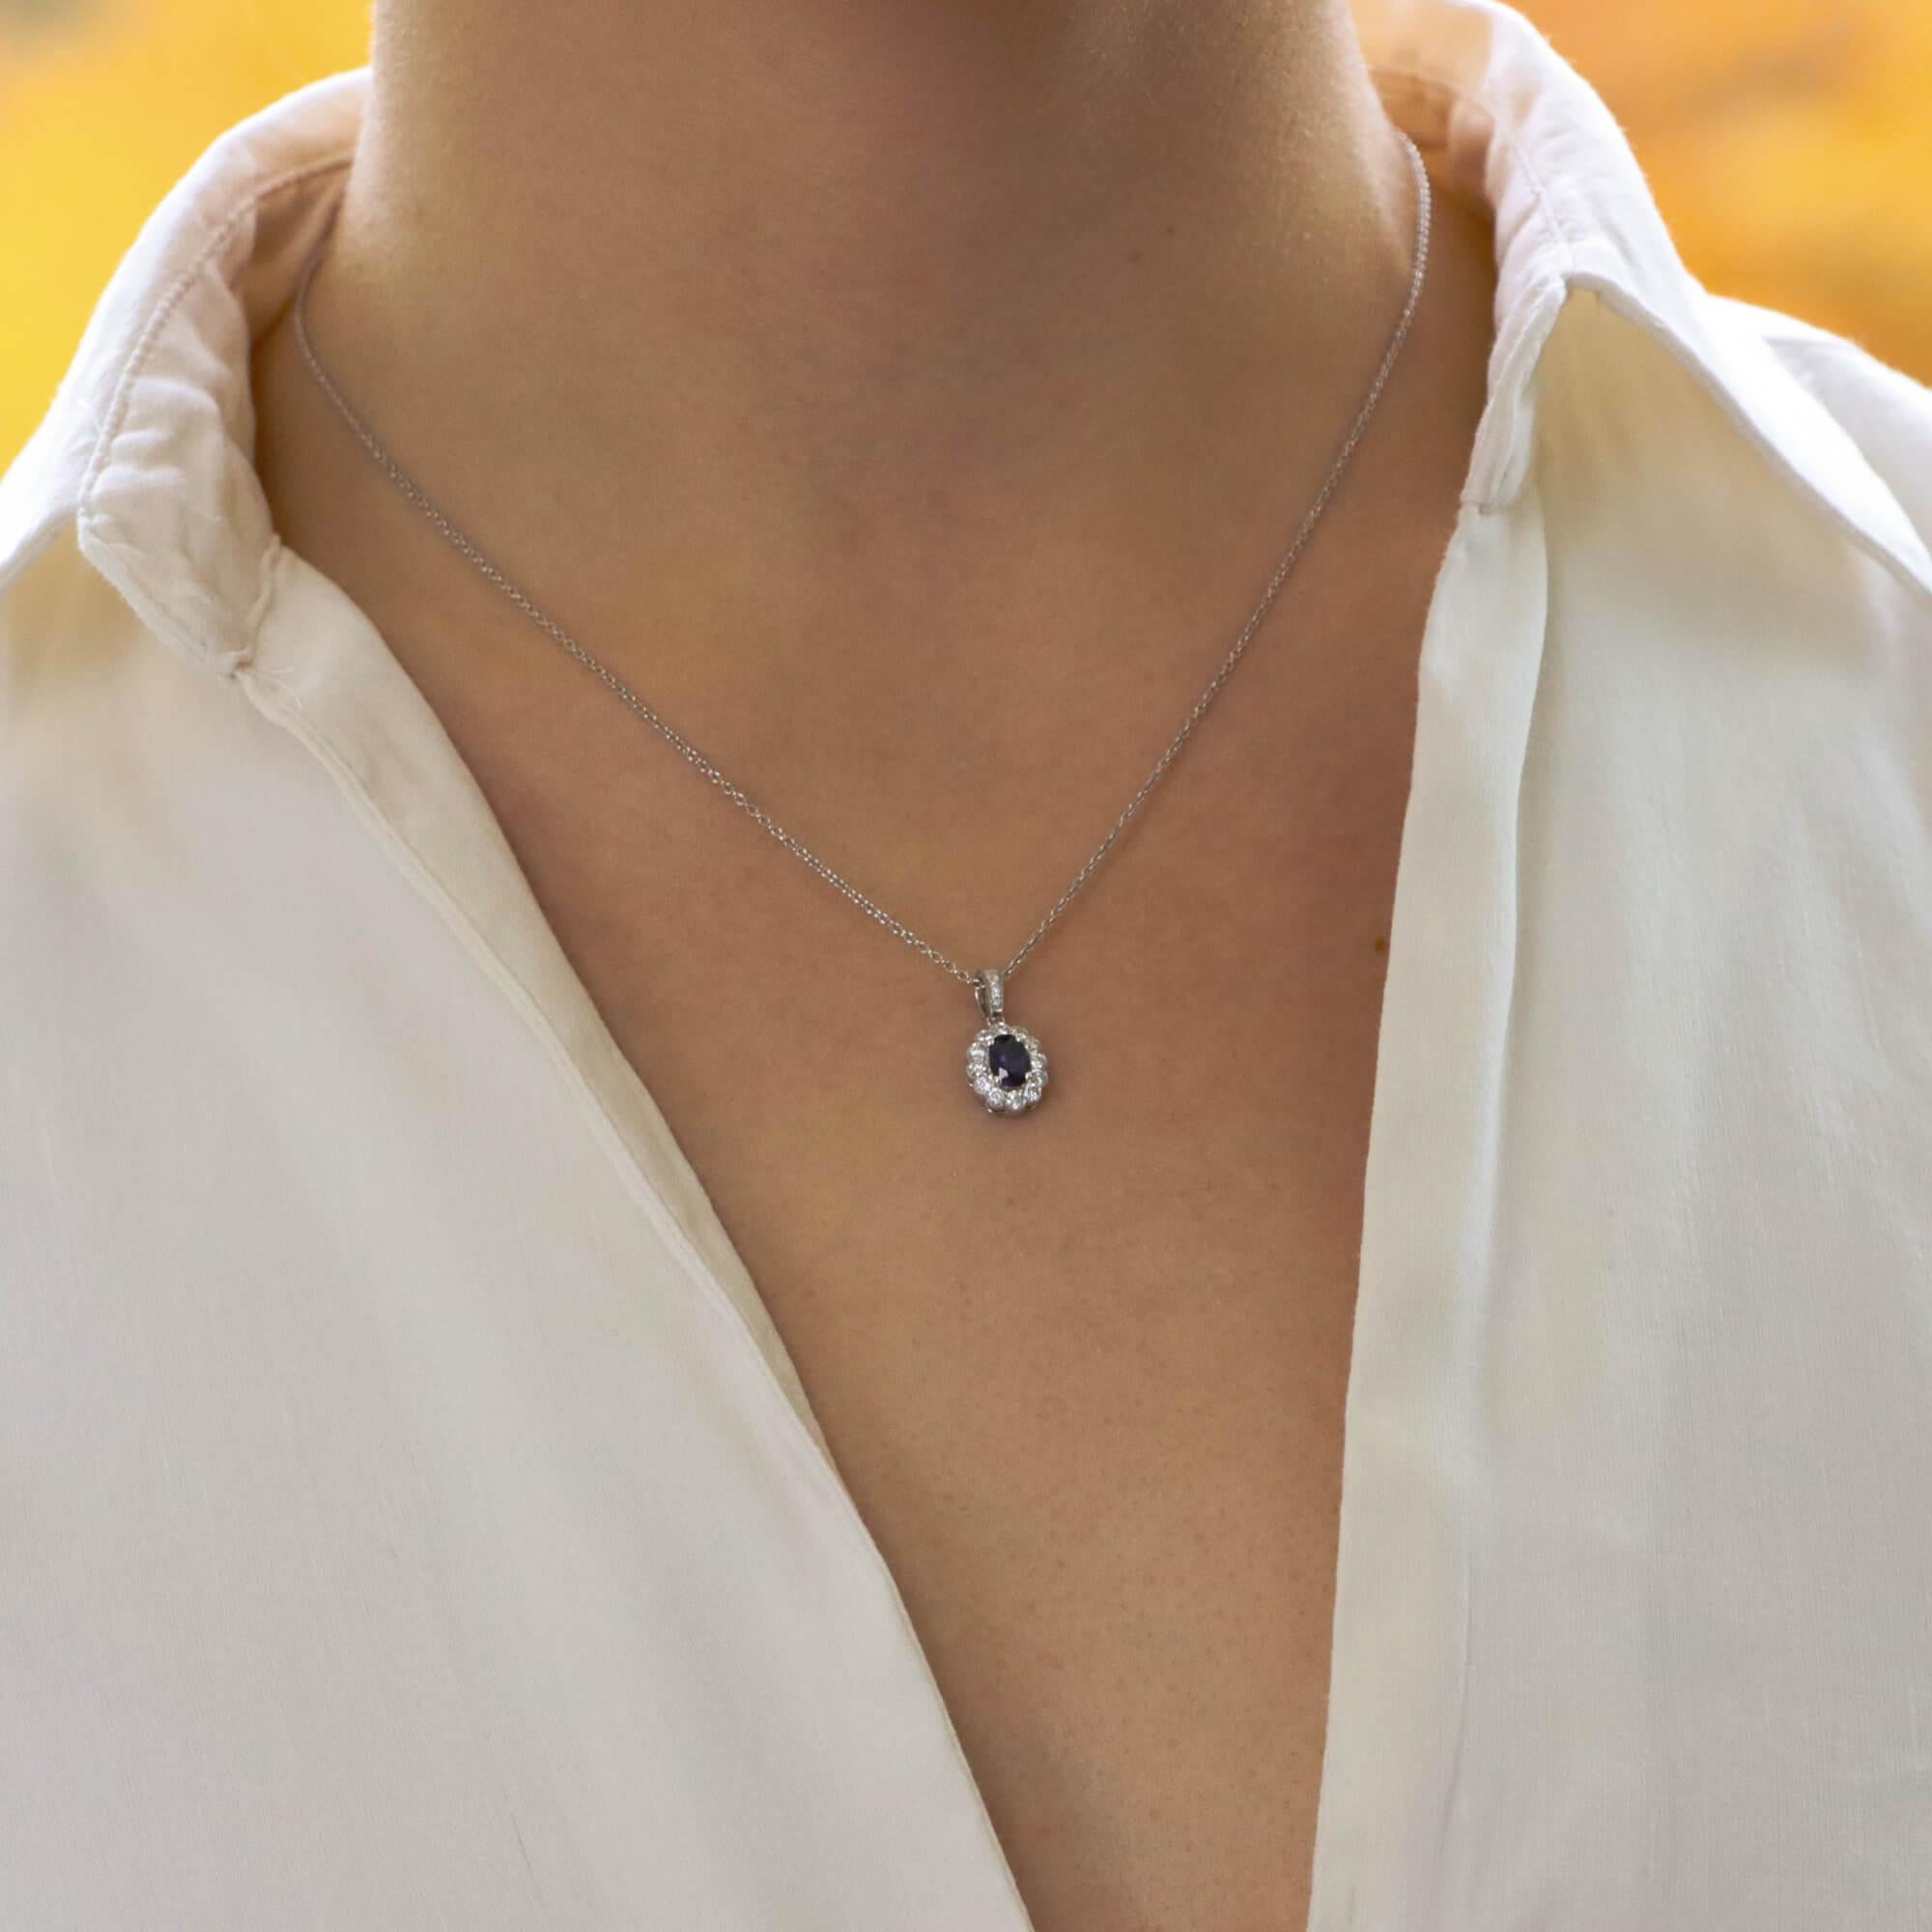 A beautiful oval cut sapphire and diamond cluster pendant set in 18k white gold.

The pendant is centrally set with a beautiful coloured blue oval cut sapphire which is surrounded by 12 sparkly round brilliant cut diamonds. The pendant hangs from a